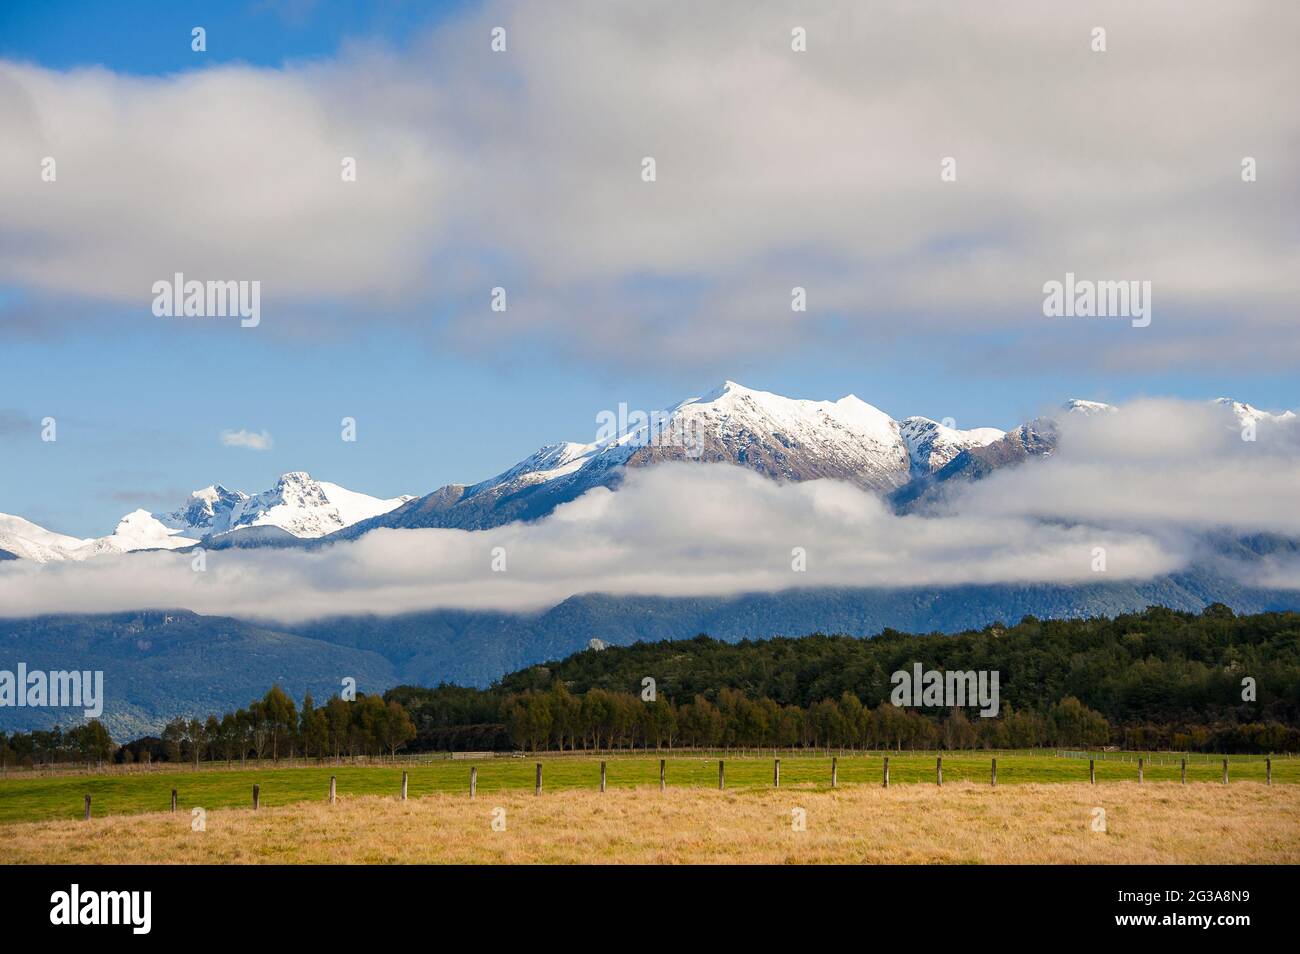 Rural landscape, Te Anau, South Island, New Zealand. Panoramic view, snow-capped mountain range with low level cloud and farmland Stock Photo